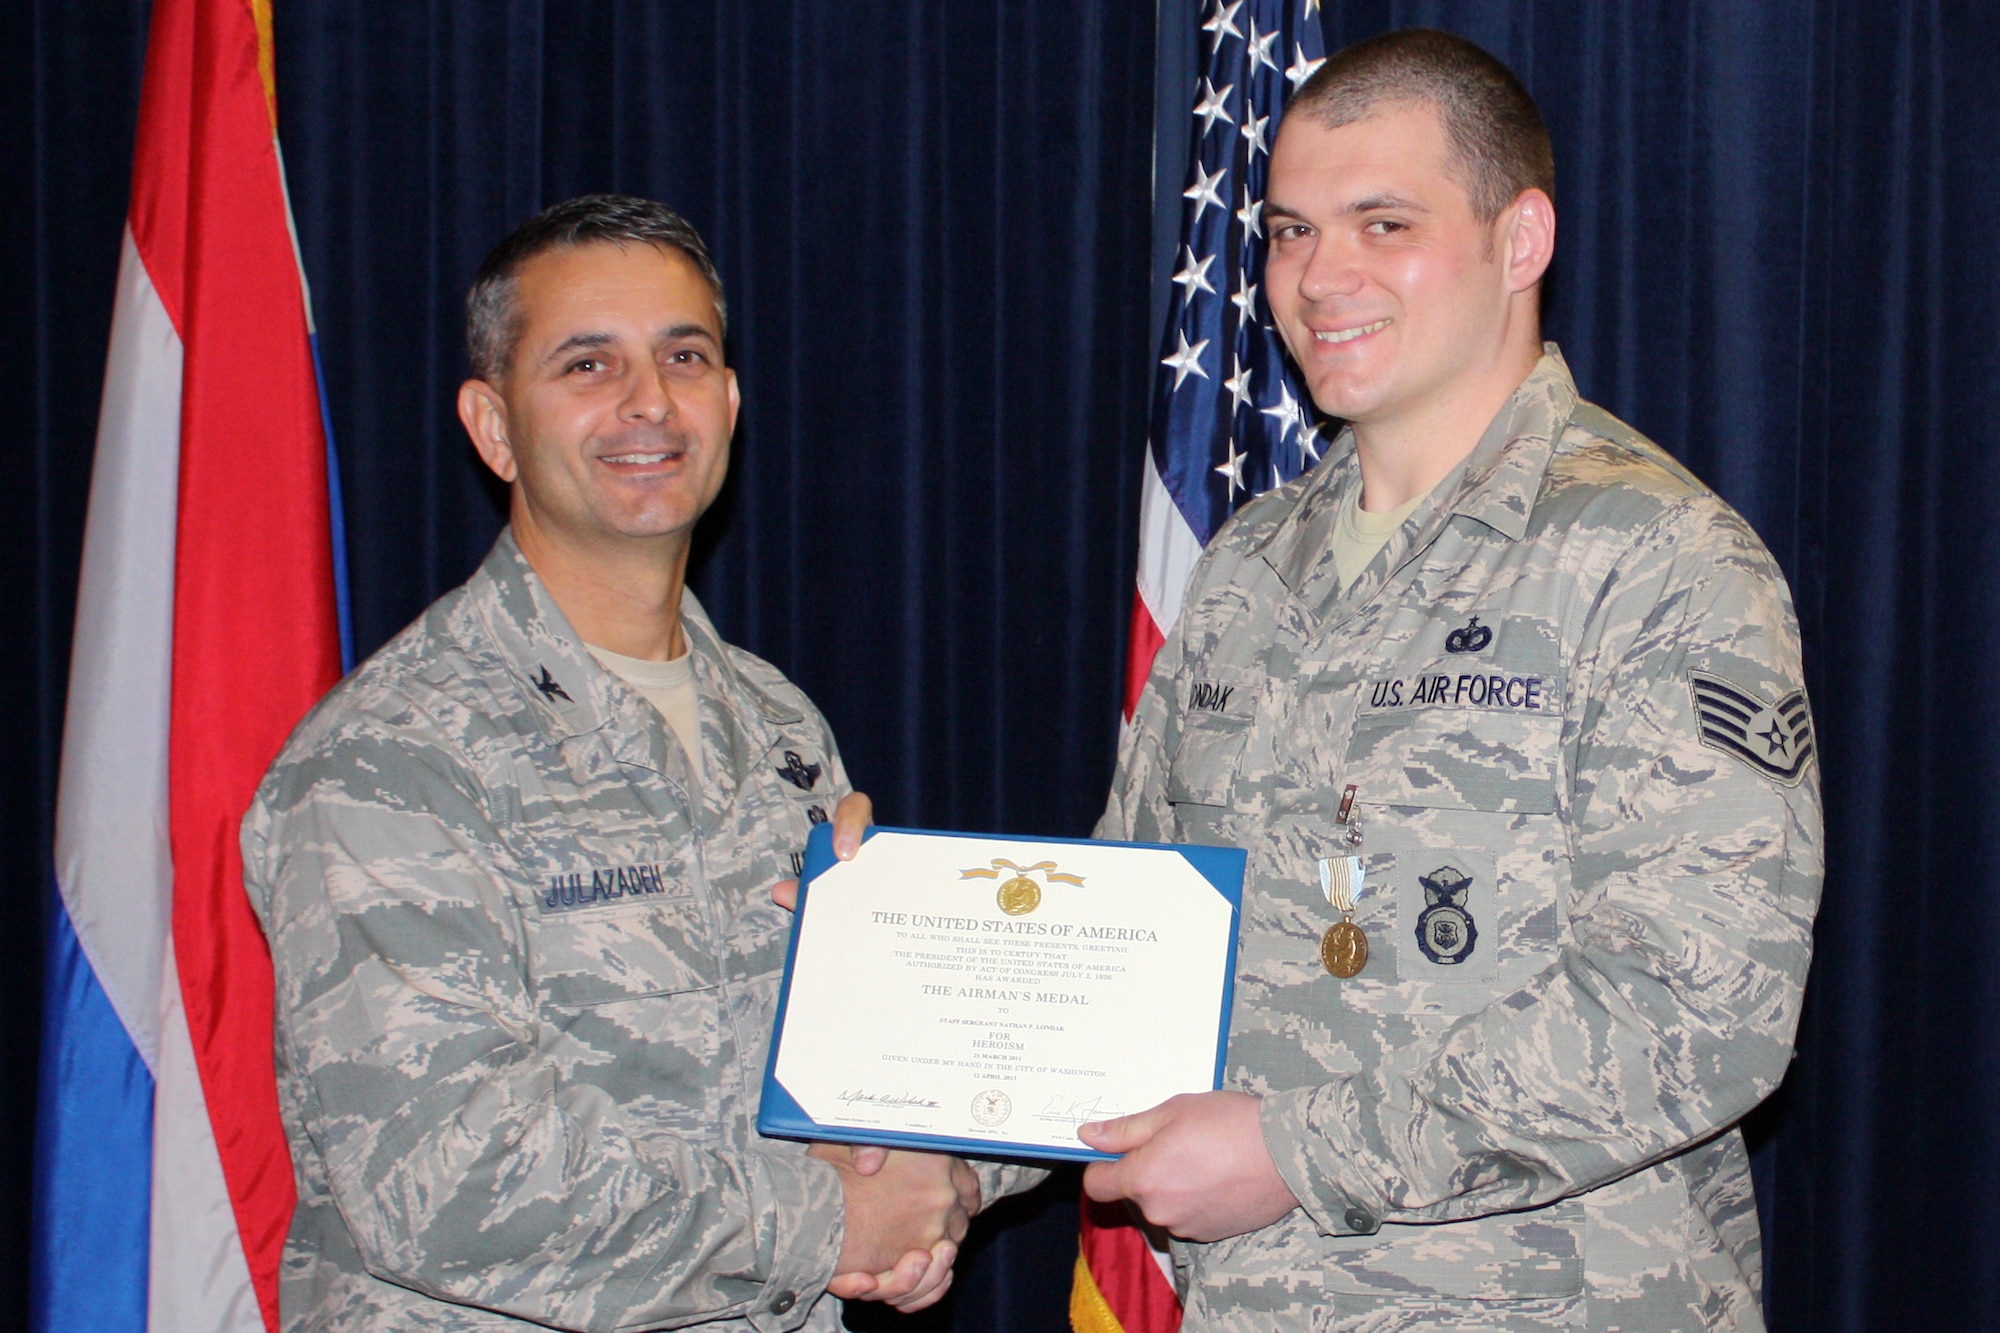 U.S. Air Force Col. David J. Julazadeh, 52nd Fighter Wing commander,
presents Staff Sgt. Nathan P. Londak, a security forces Airman stationed at
Volkel Air Base, The Netherlands, an Airman's Medal on Nov. 15. This medal is
given to service members who distinguish themselves with heroic actions,
usually at the voluntary risk of their lives, but without involving combat.
Londak received this medal for his heroic actions in stopping an armed
robbery in March 2011. (U.S. Air Force courtesy photo/released)
